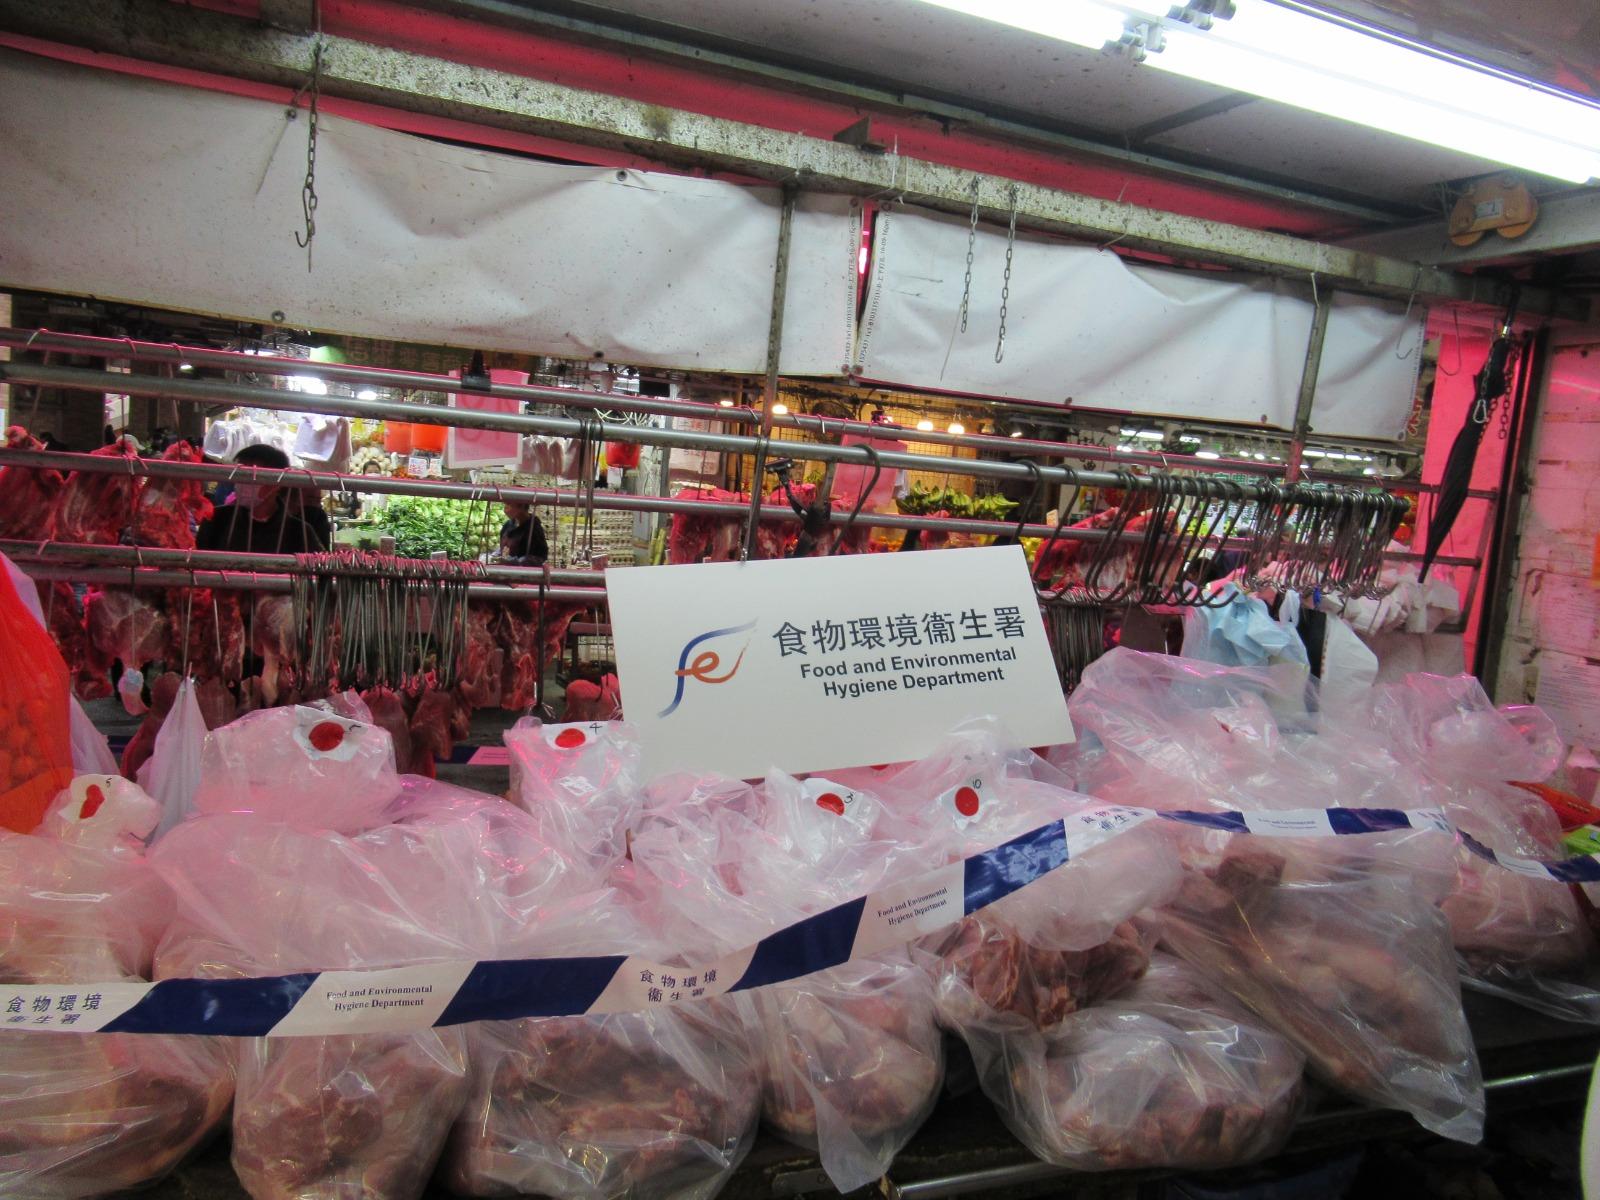 The Food and Environmental Hygiene Department (FEHD) raided two licensed fresh provision shops in Mei Foo Sun Chuen, Sham Shui Po, suspected of selling chilled meat or frozen meat as fresh meat in a blitz operation today (January 26). Photo shows the meat seized by the FEHD officers during the operation.